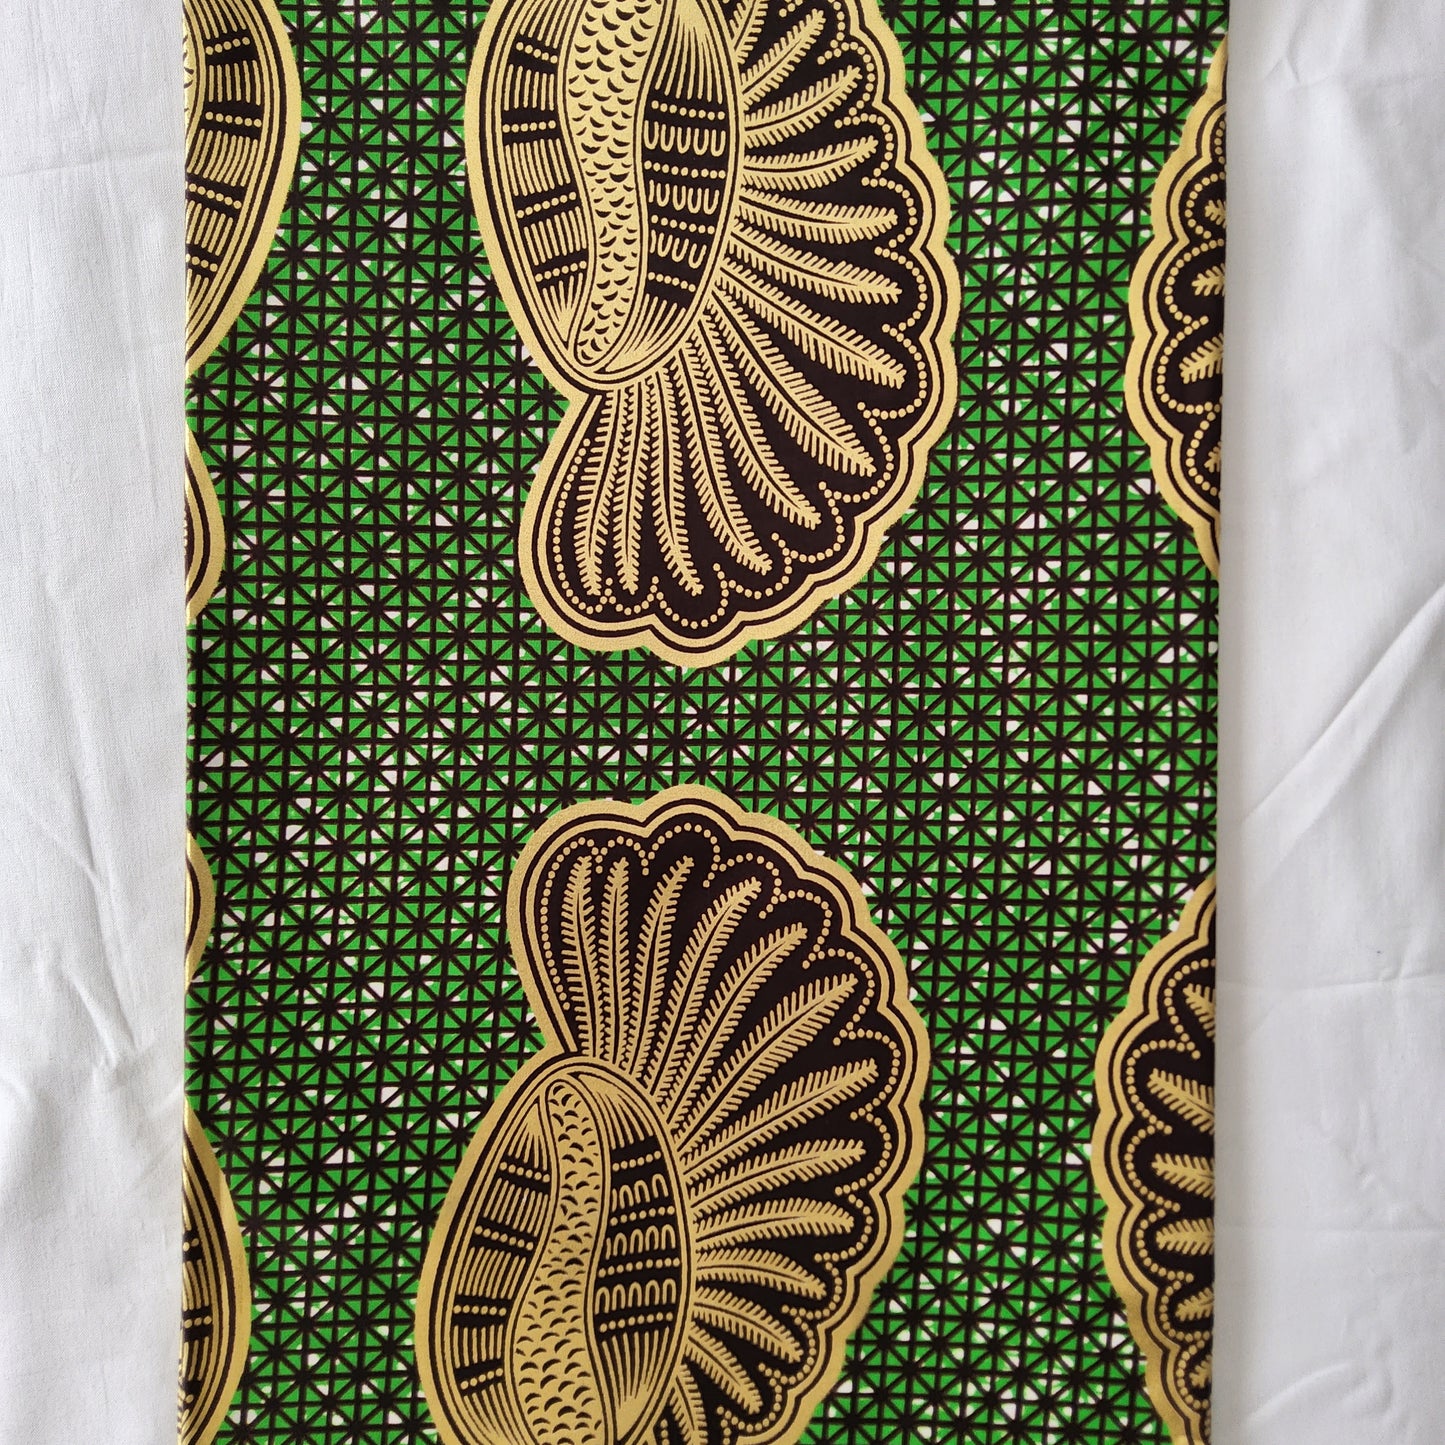 REINVENTED CLASSIC GOLD EMBELLISHED AFRICAN WAX BLOCK PRINT FABRIC - 6 YARDS BUNDLE